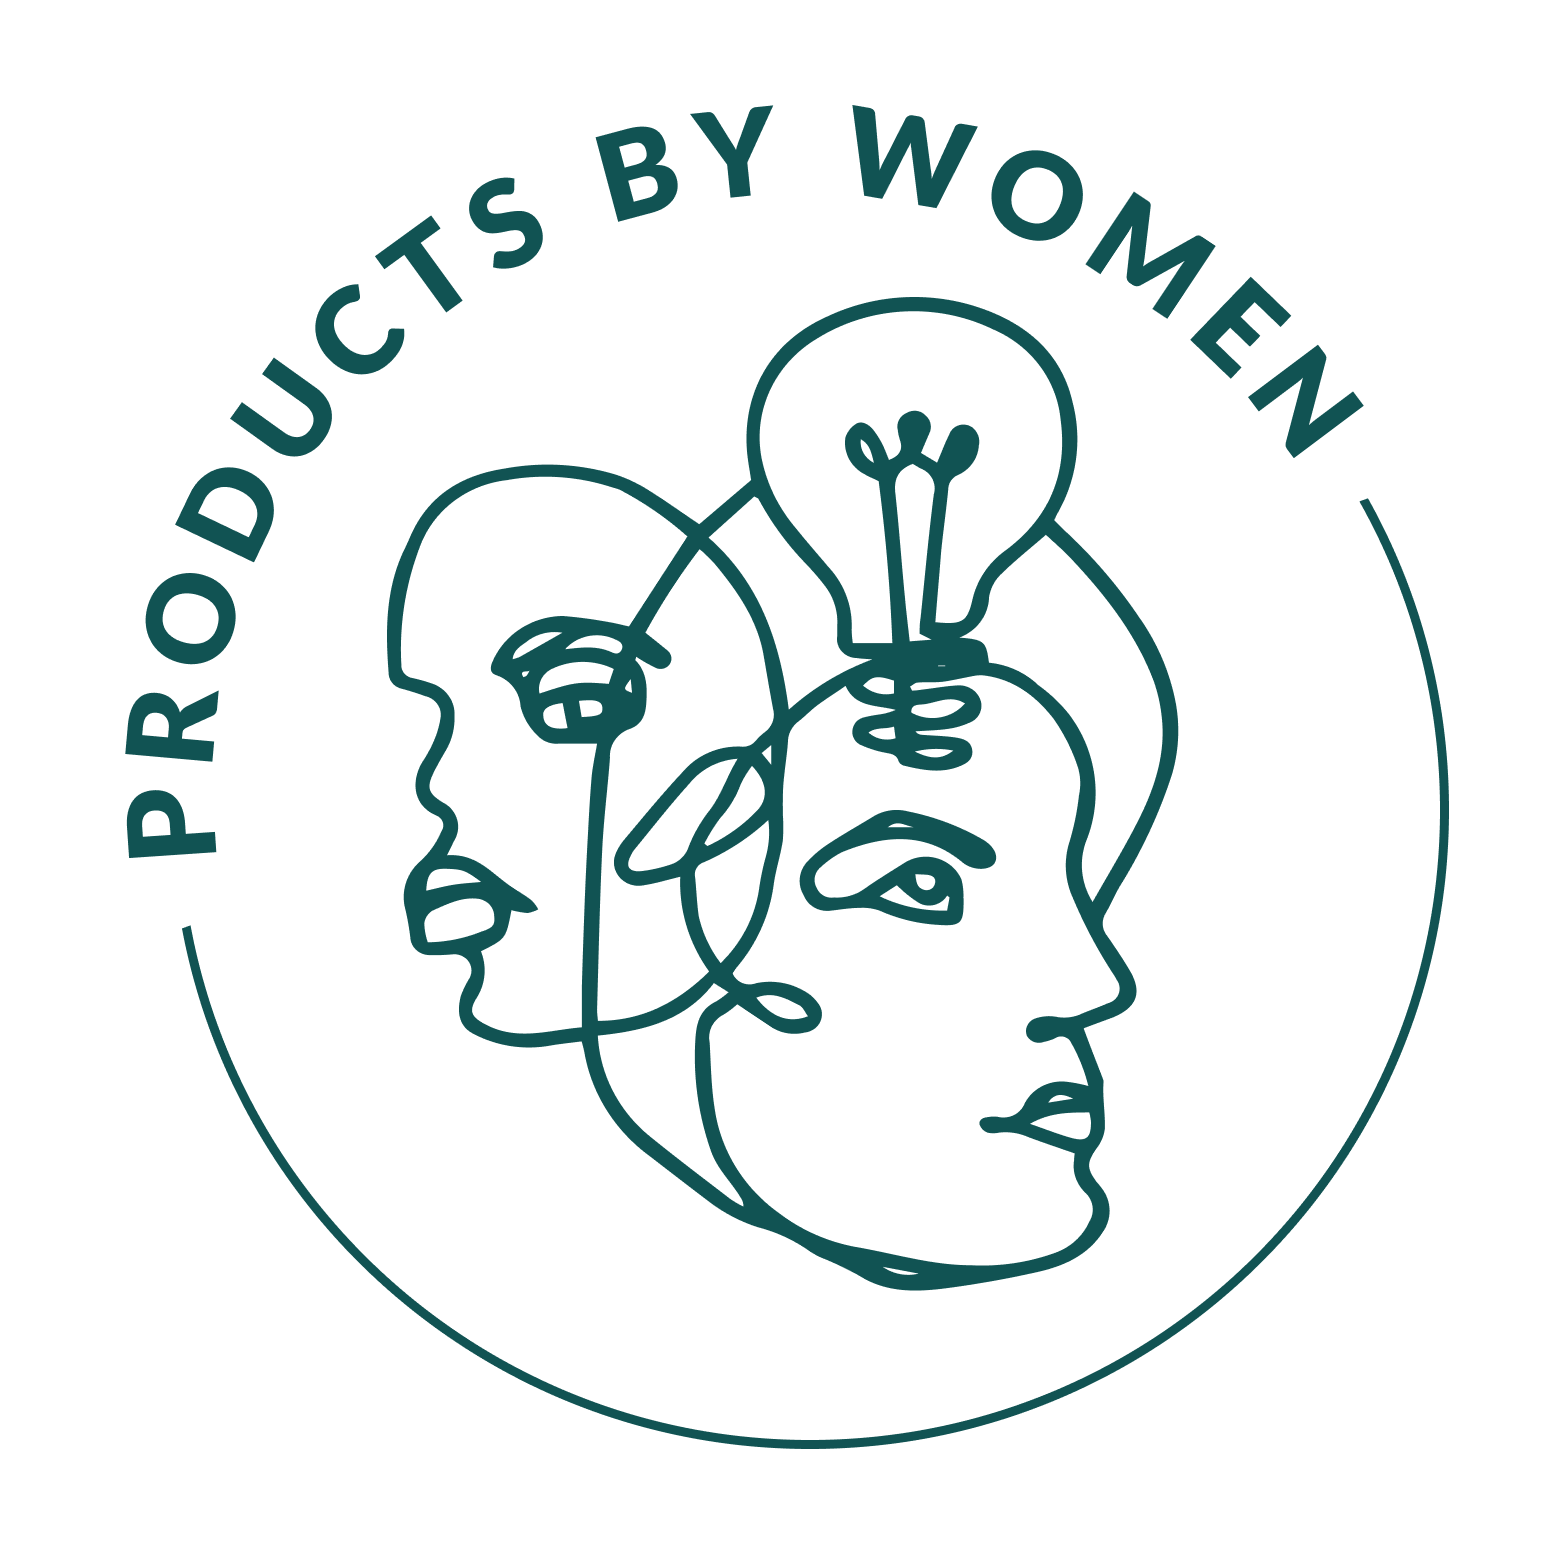 Products by Women